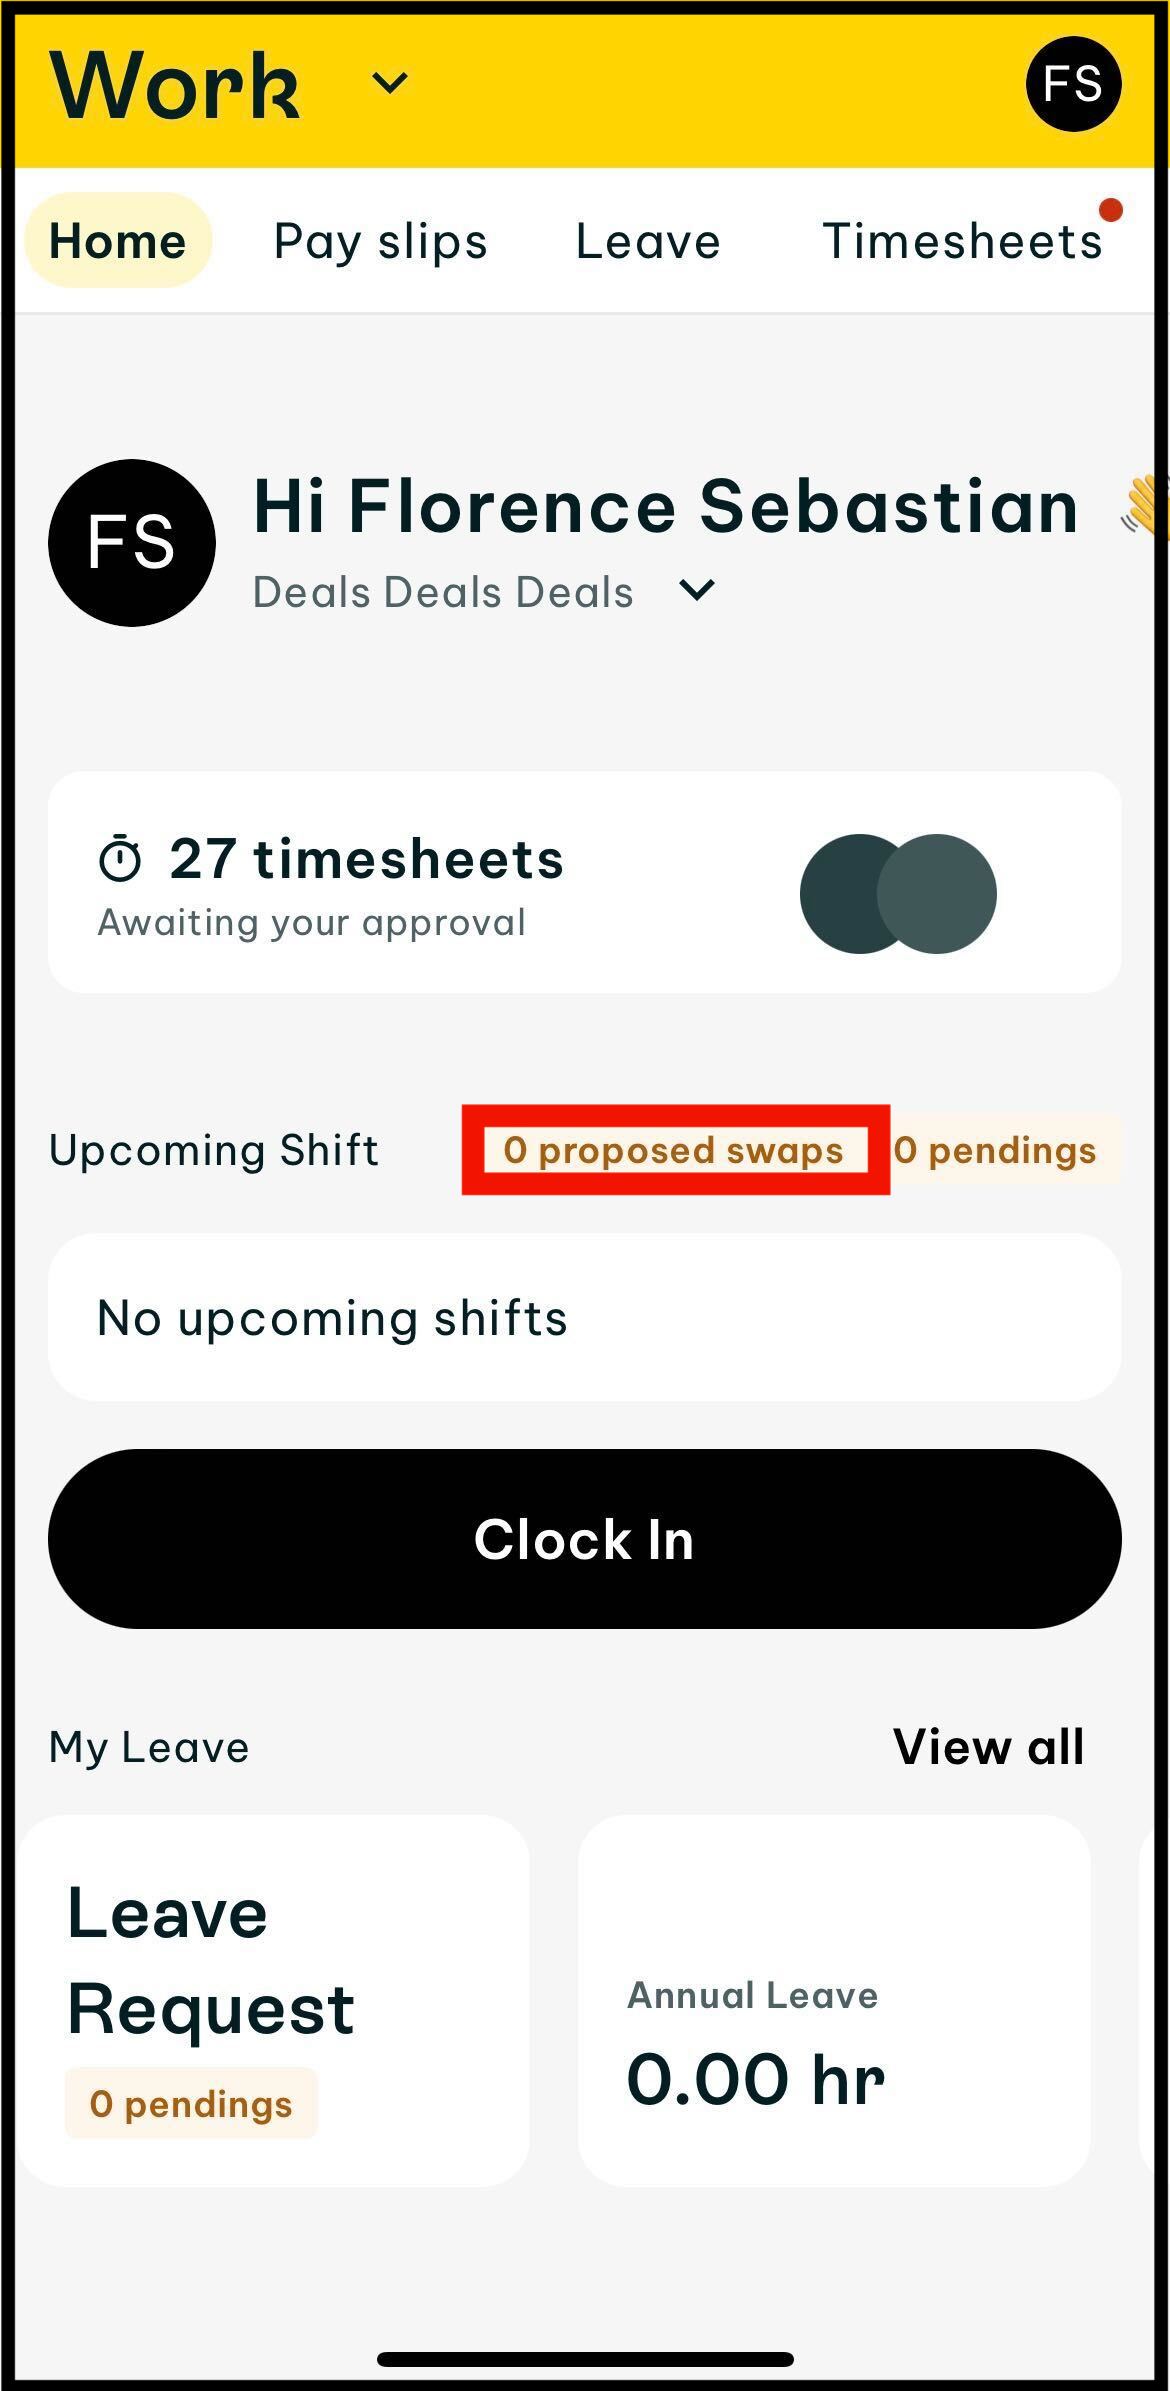 screenshot of where to click on propsoed swaps in the work home screen of swah